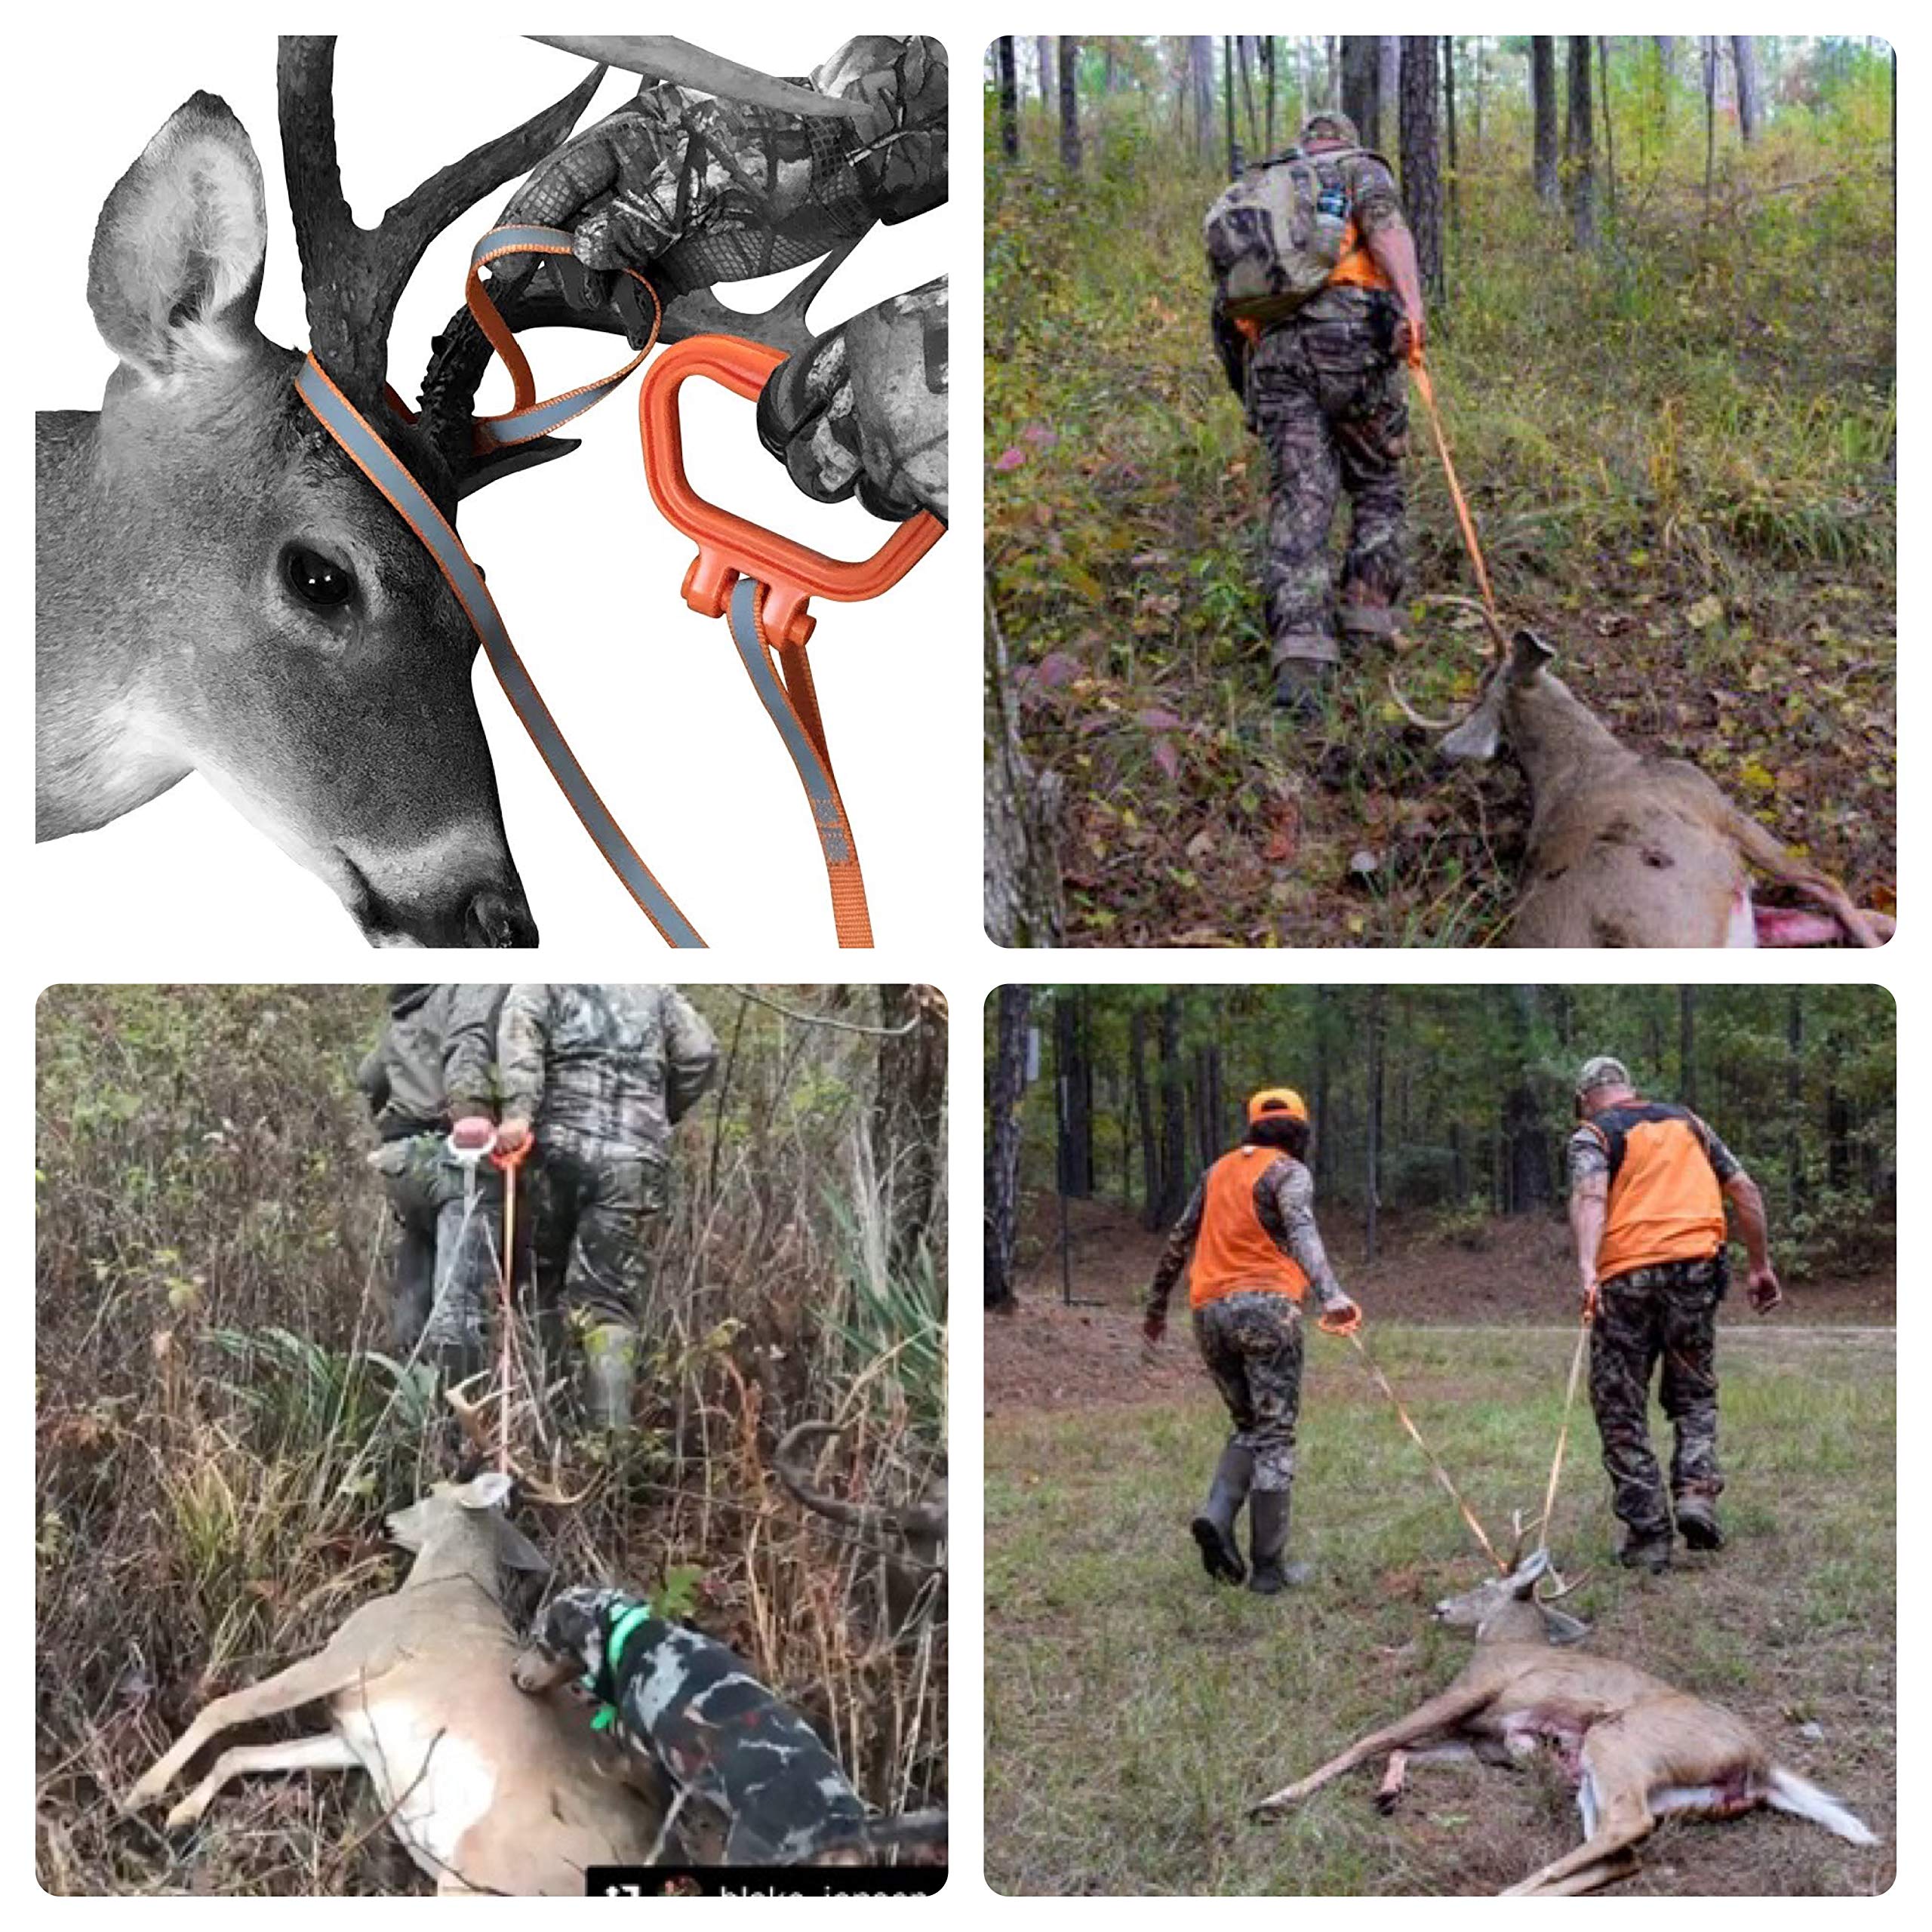 MULTUS: Deer Drag and Harness Hunting Gear Every Way to Drag a Deer in ONE Product Fast & Easy! Hunting accessories for deer hunting Gift